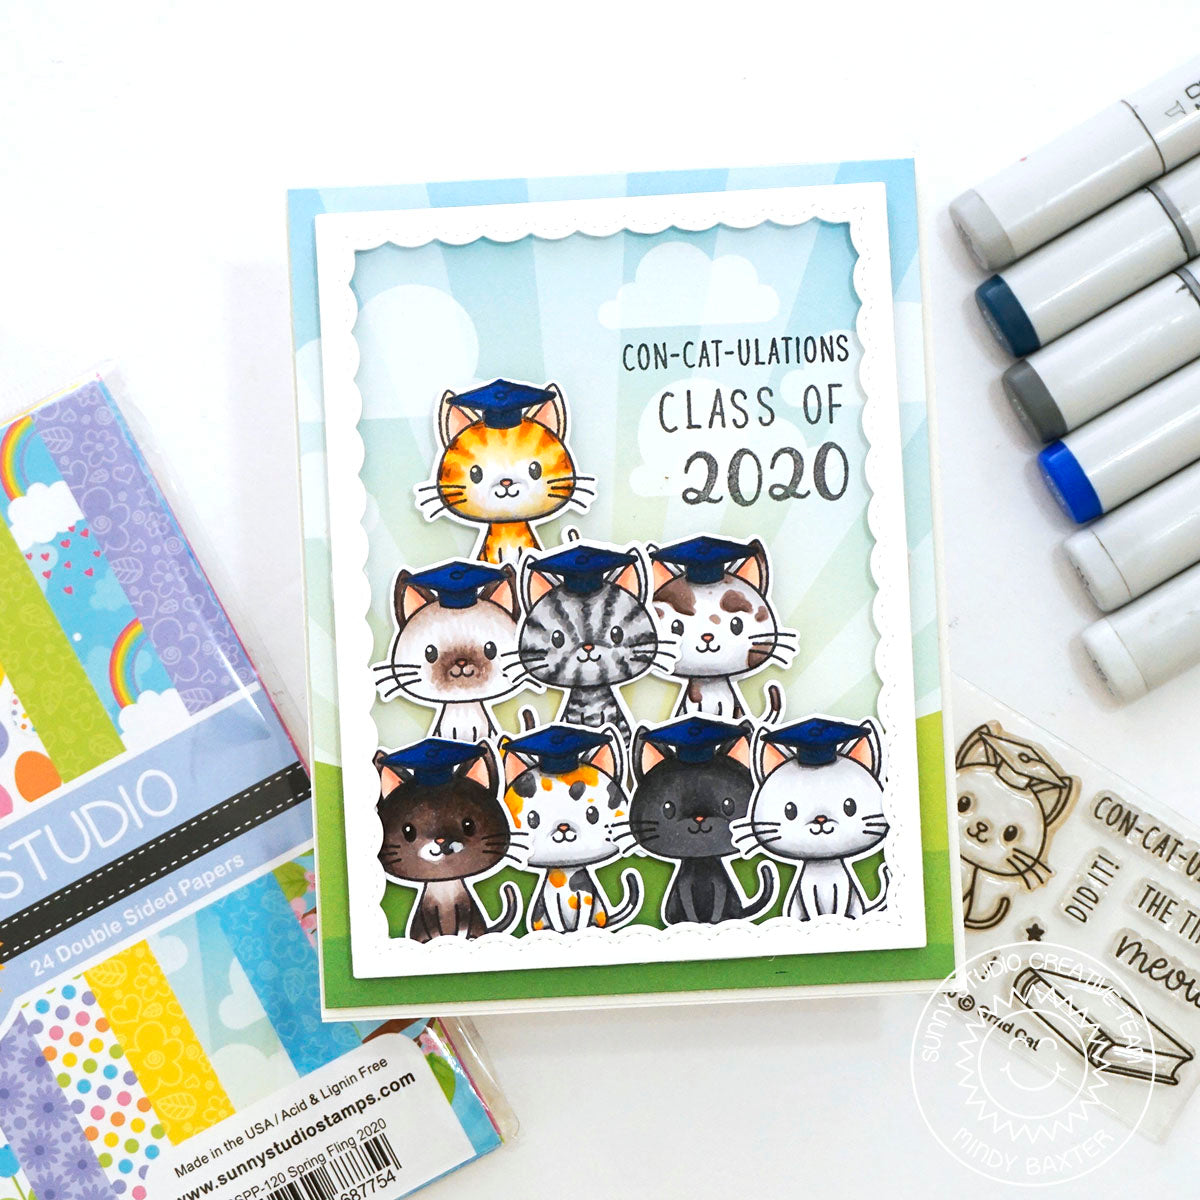 Sunny Studio Con-cat-ulations Punny Kitty Cat Pyramid Handmade Graduation Card using Grad Cat 2x3 Clear Photopolymer Stamps